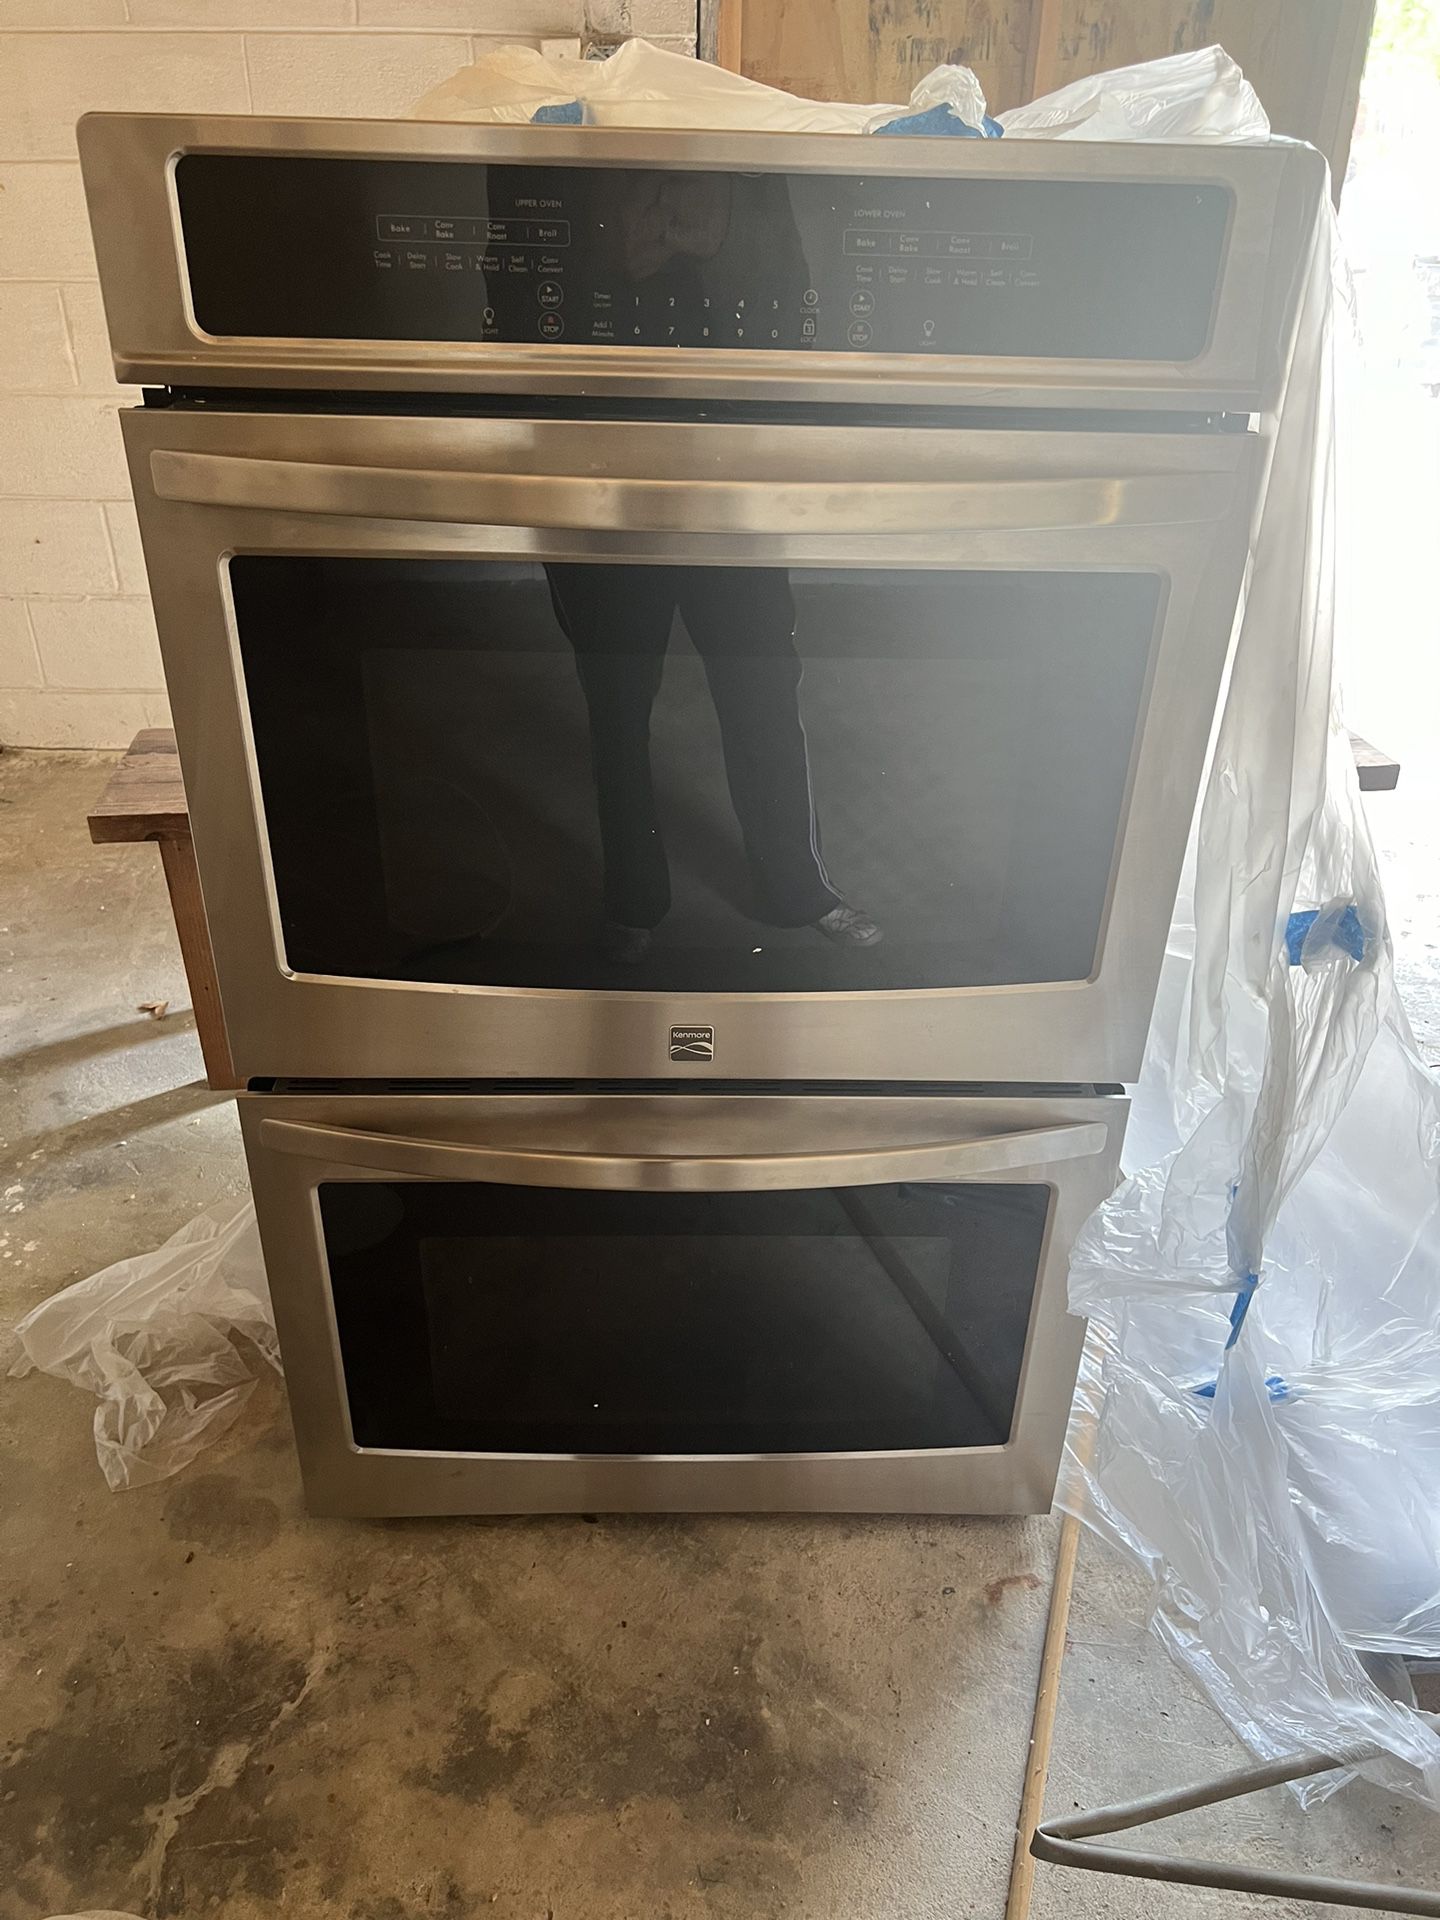 Oven, Electricity $200👍